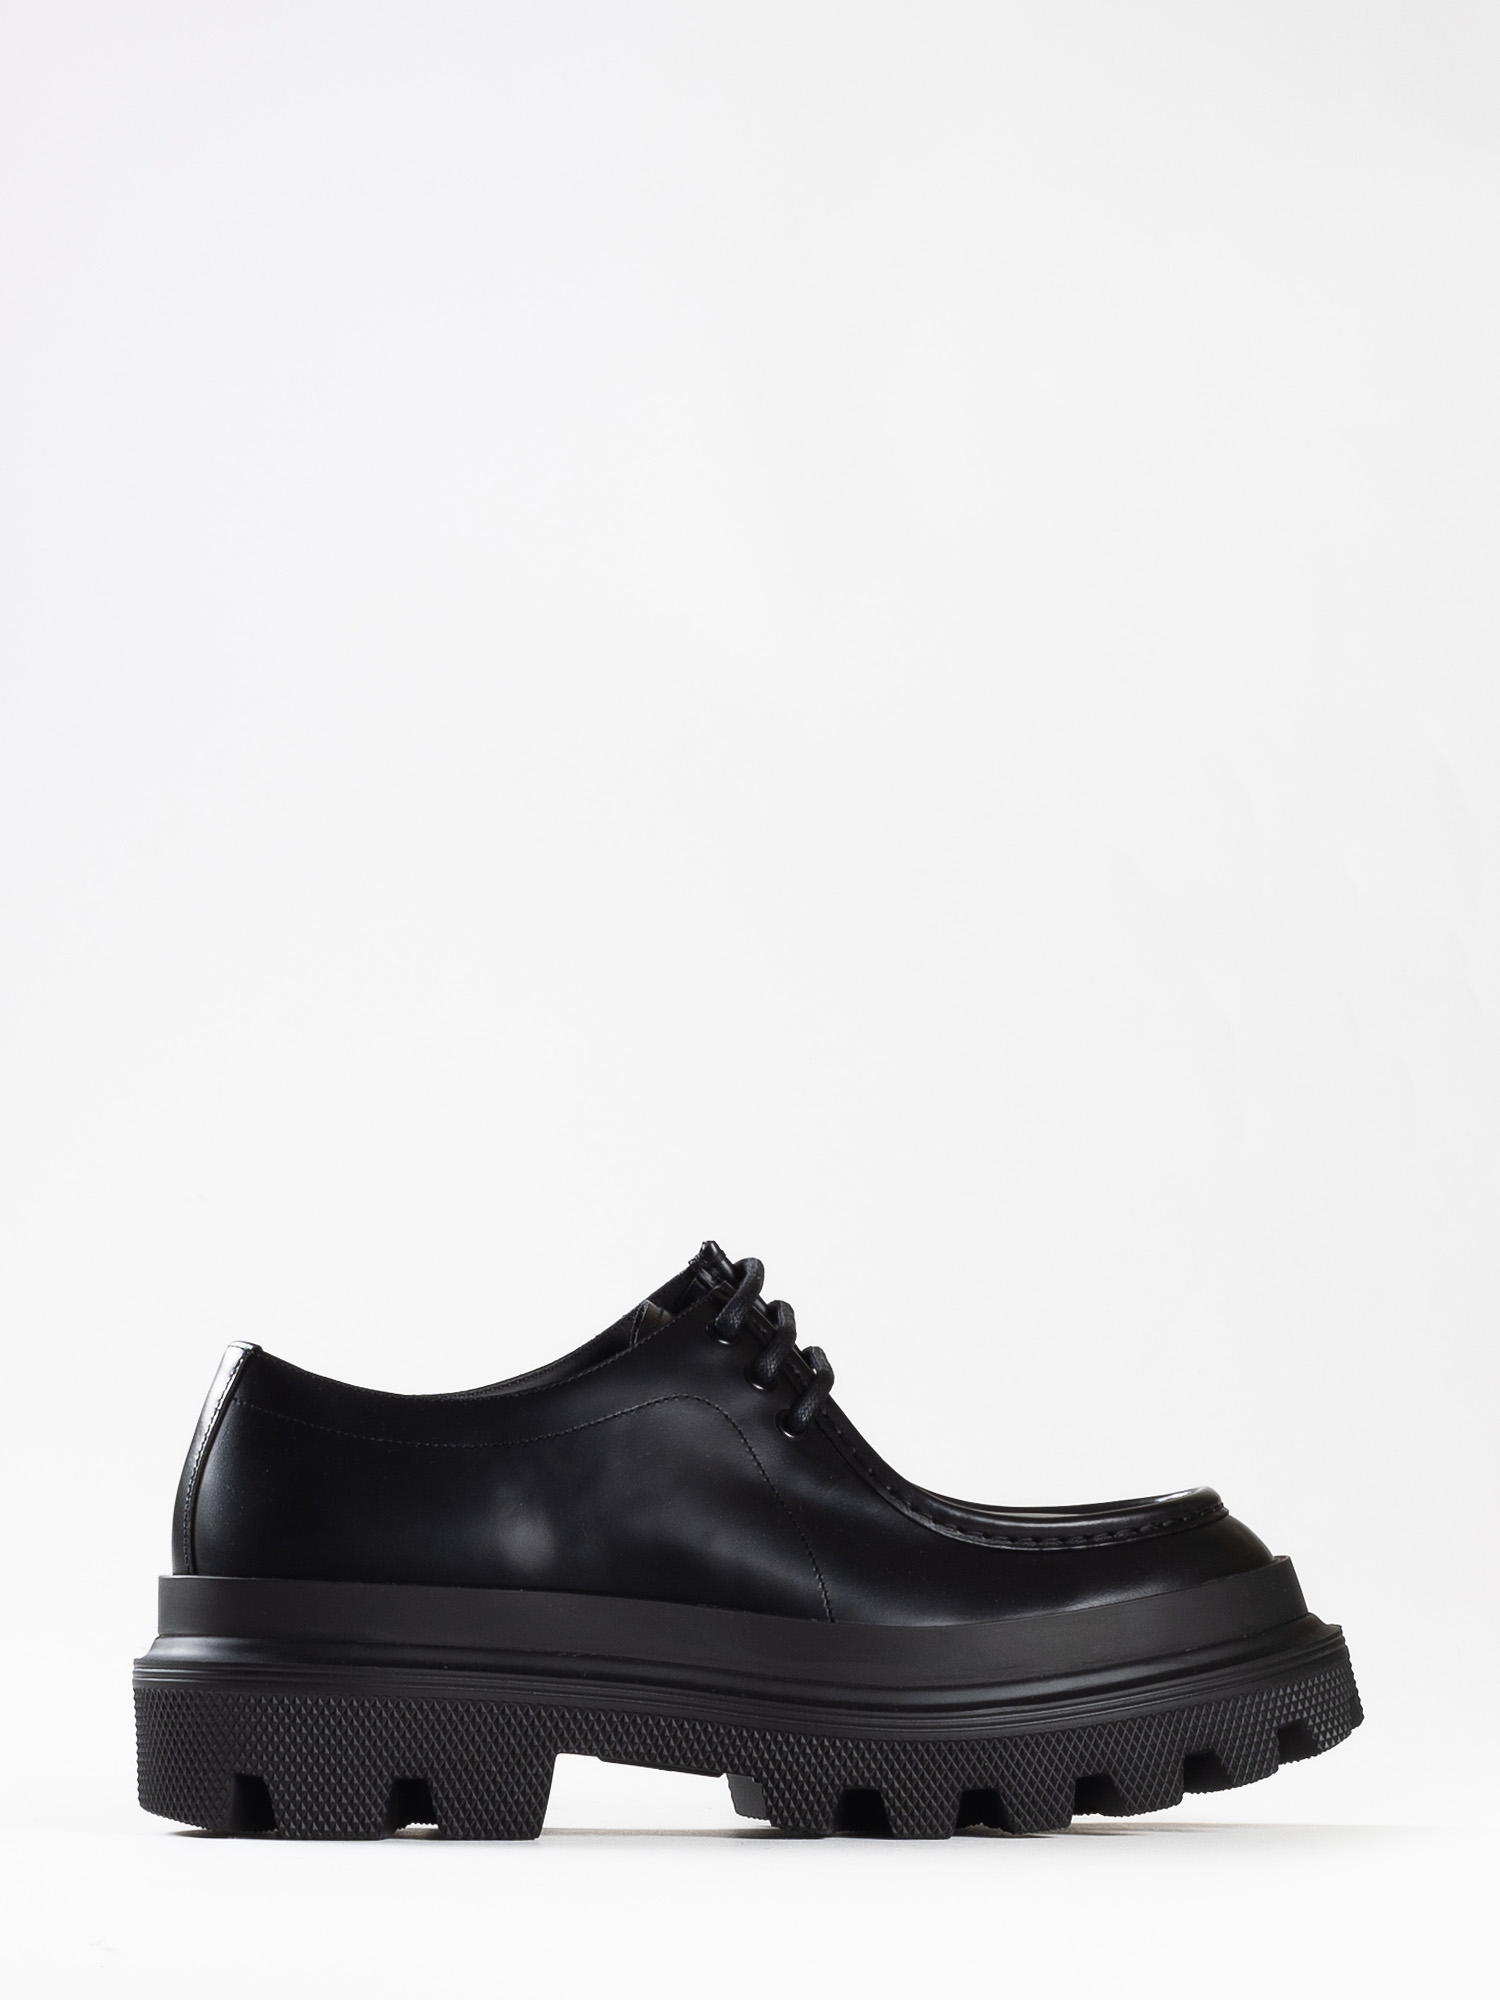 LEATHER DERBY SHOES - DOLCE & GABBANA